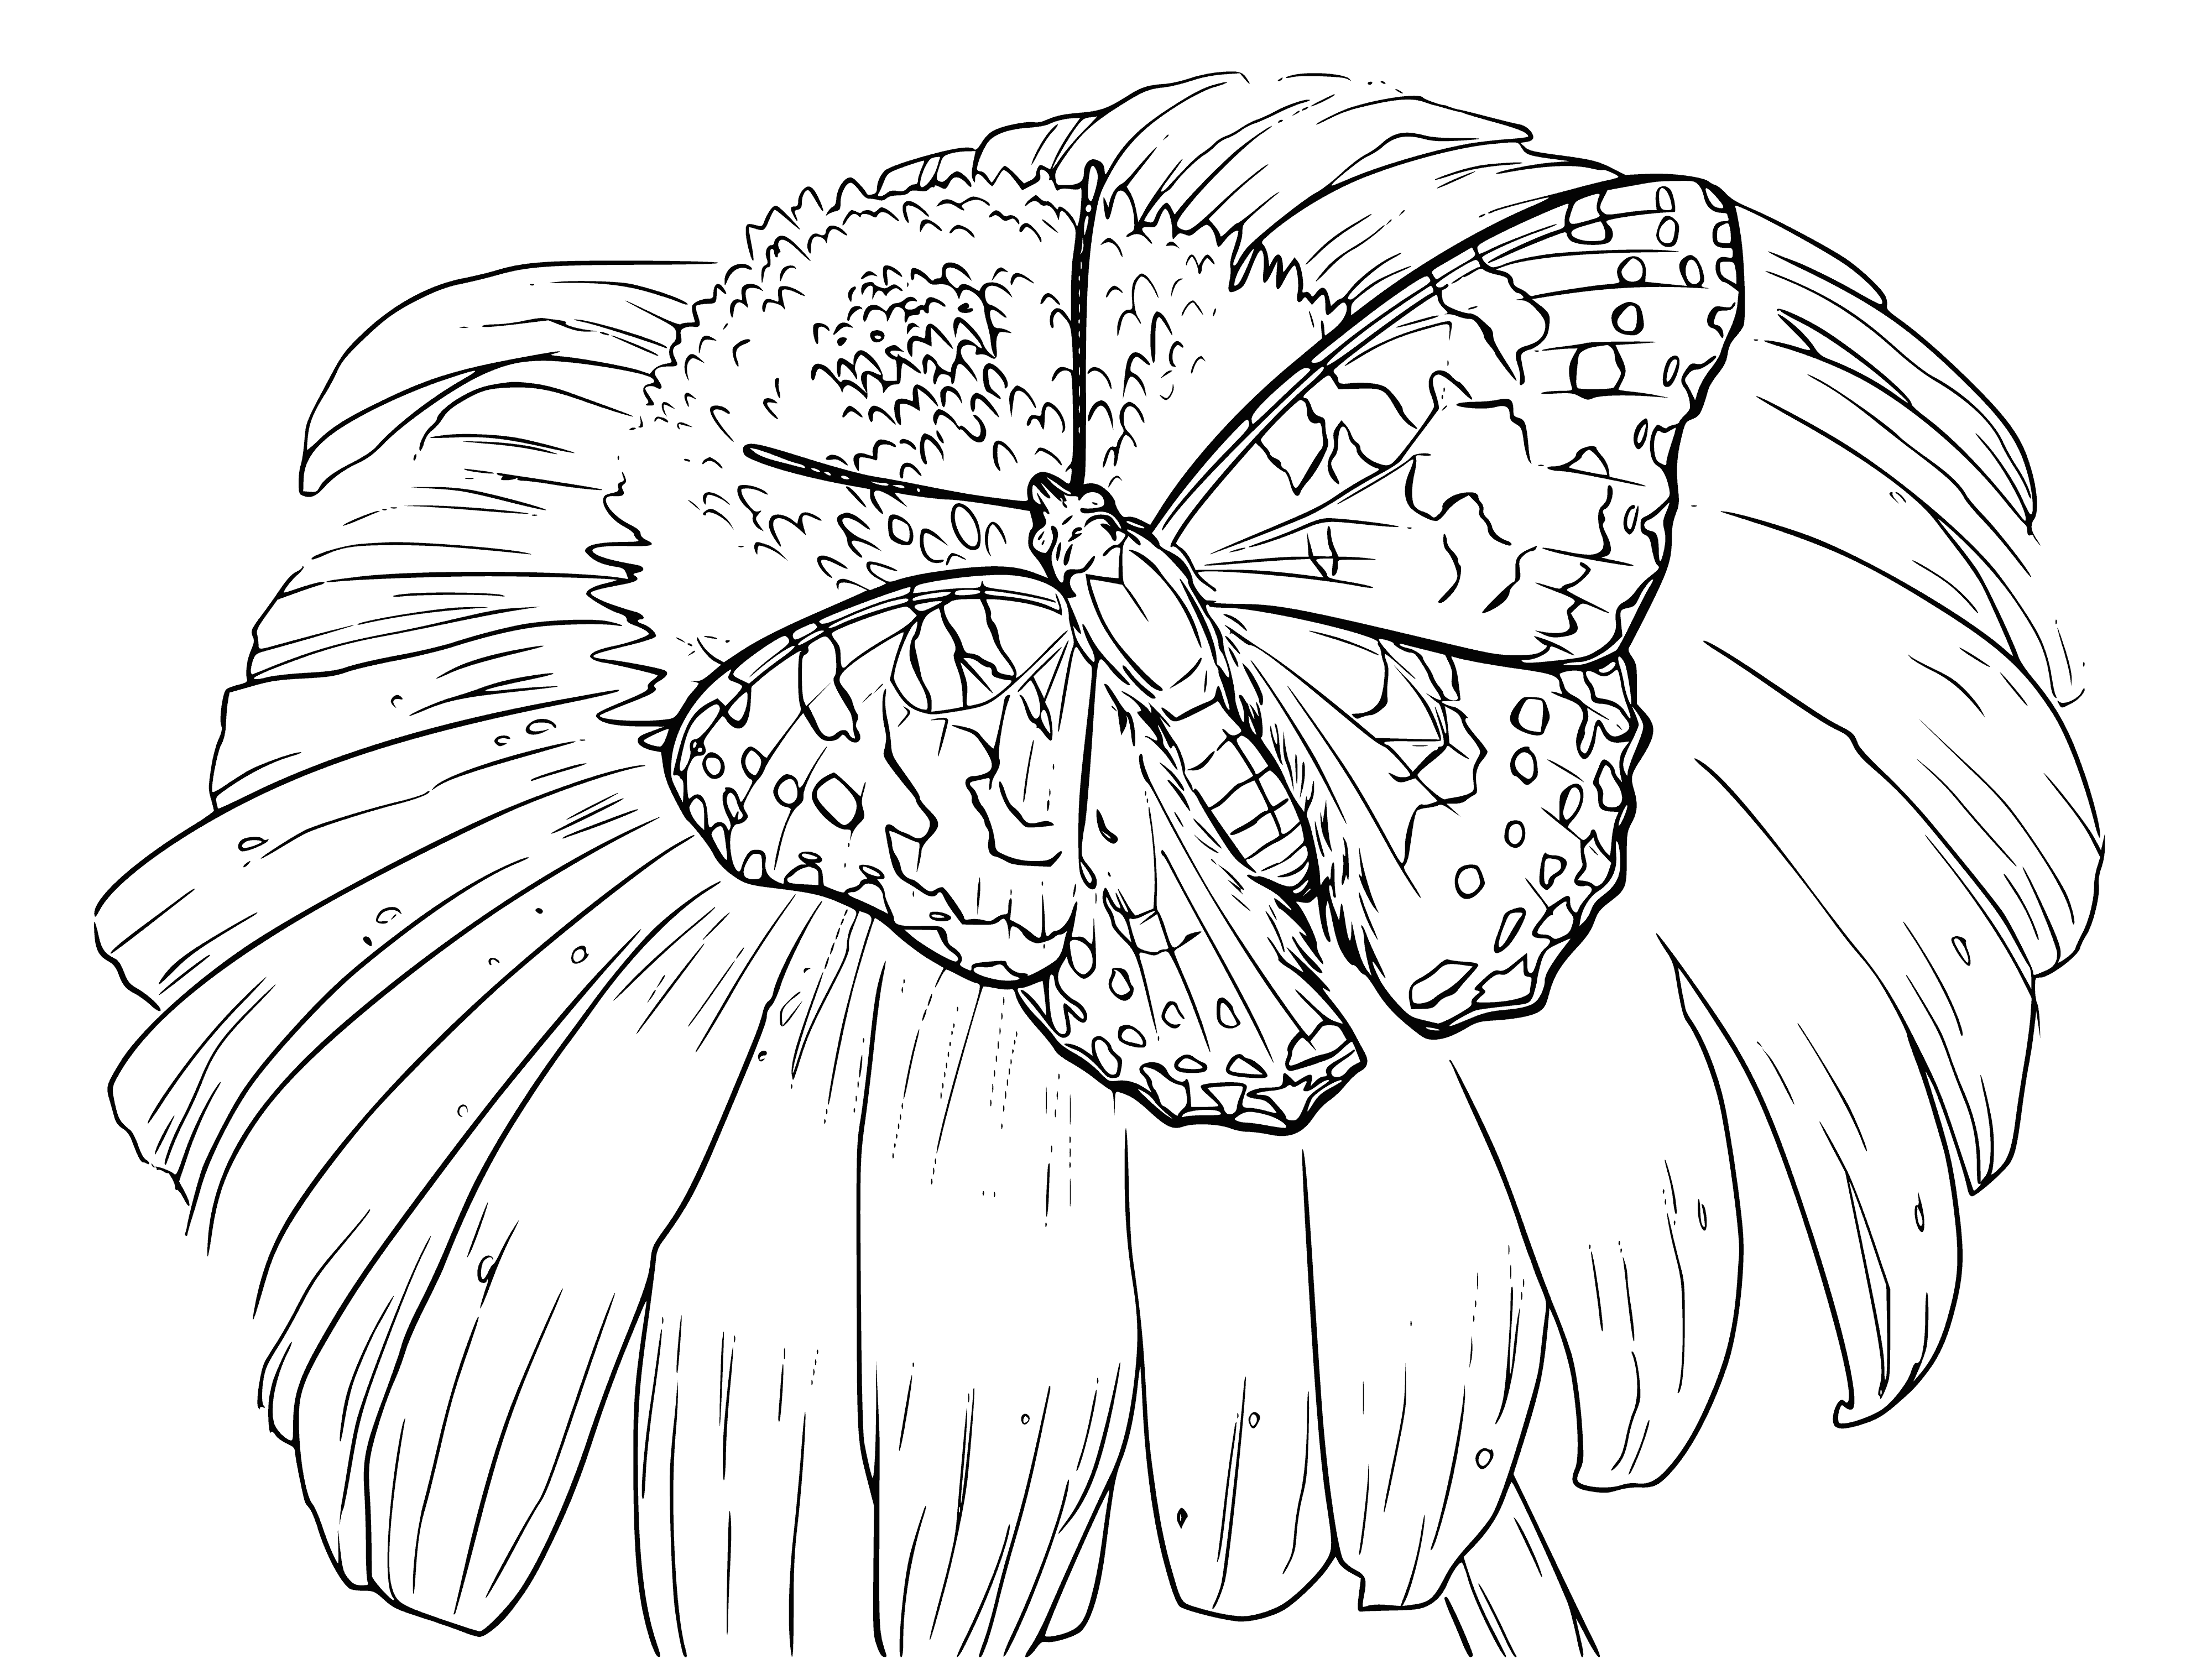 coloring page: Butterfly sits atop a camomile flower. Mostly white with black spots, long antennae. Flower is yellow and white with many petals.